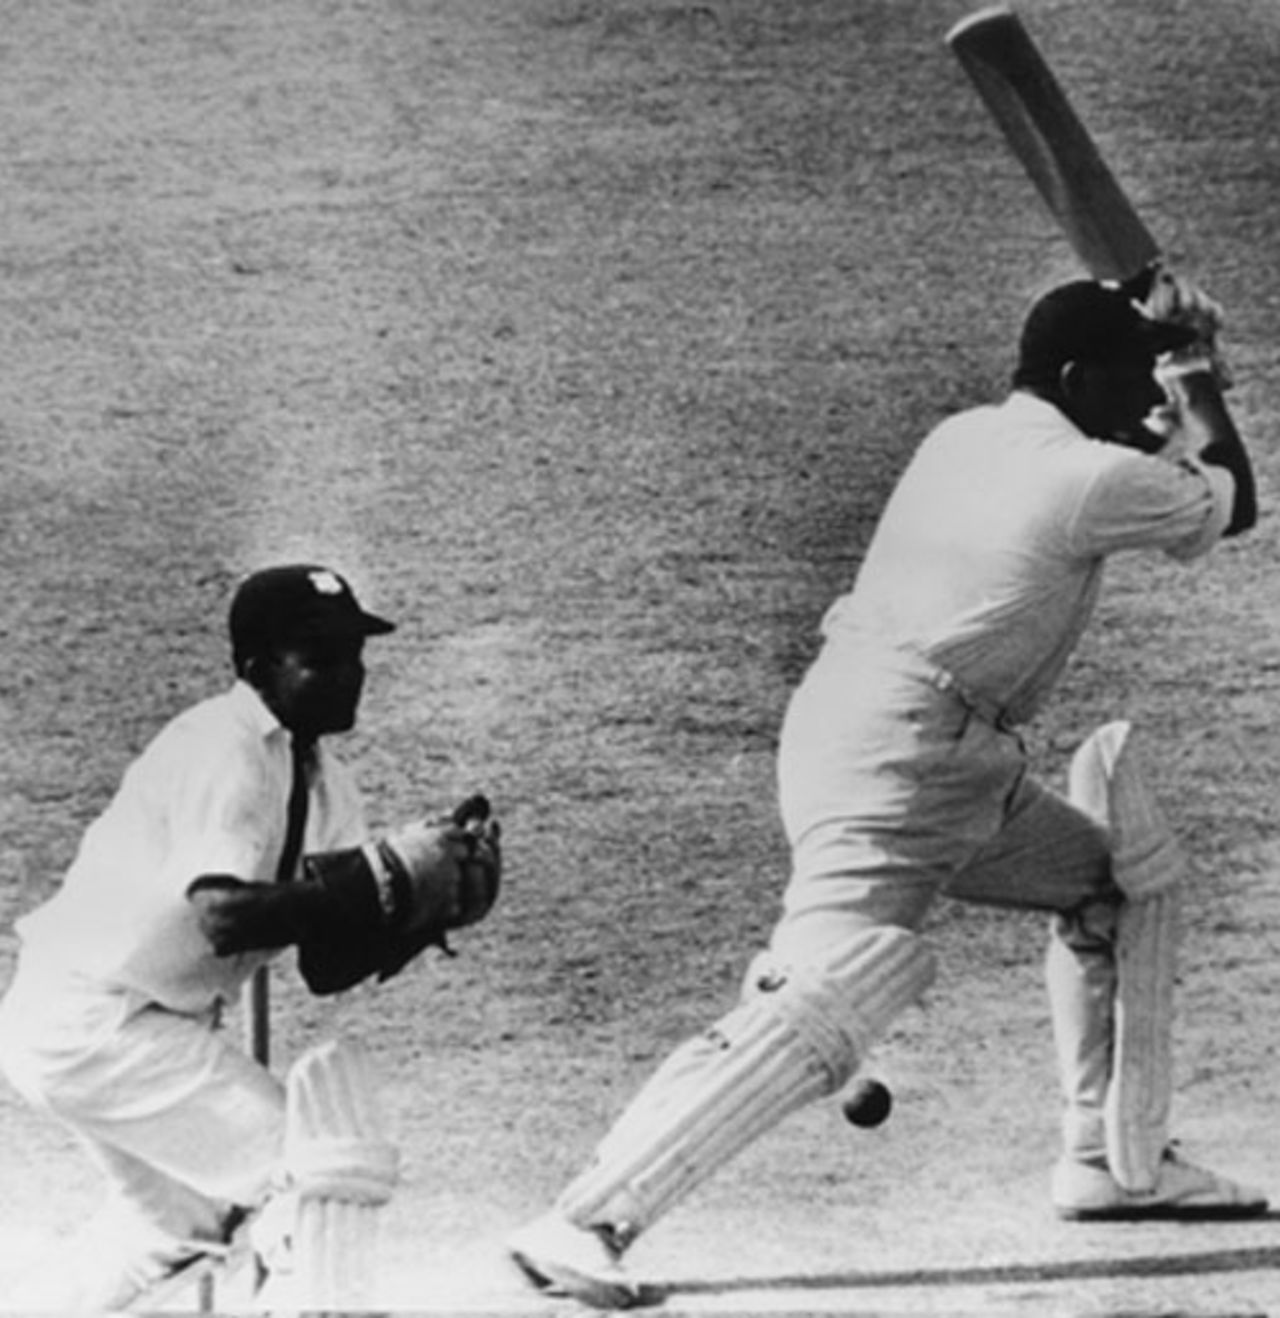 Colin Cowdrey plays and misses during his match-winning innings of 71, West Indies v England, 4th Test, Port of Spain, 5th day, March 19, 1968